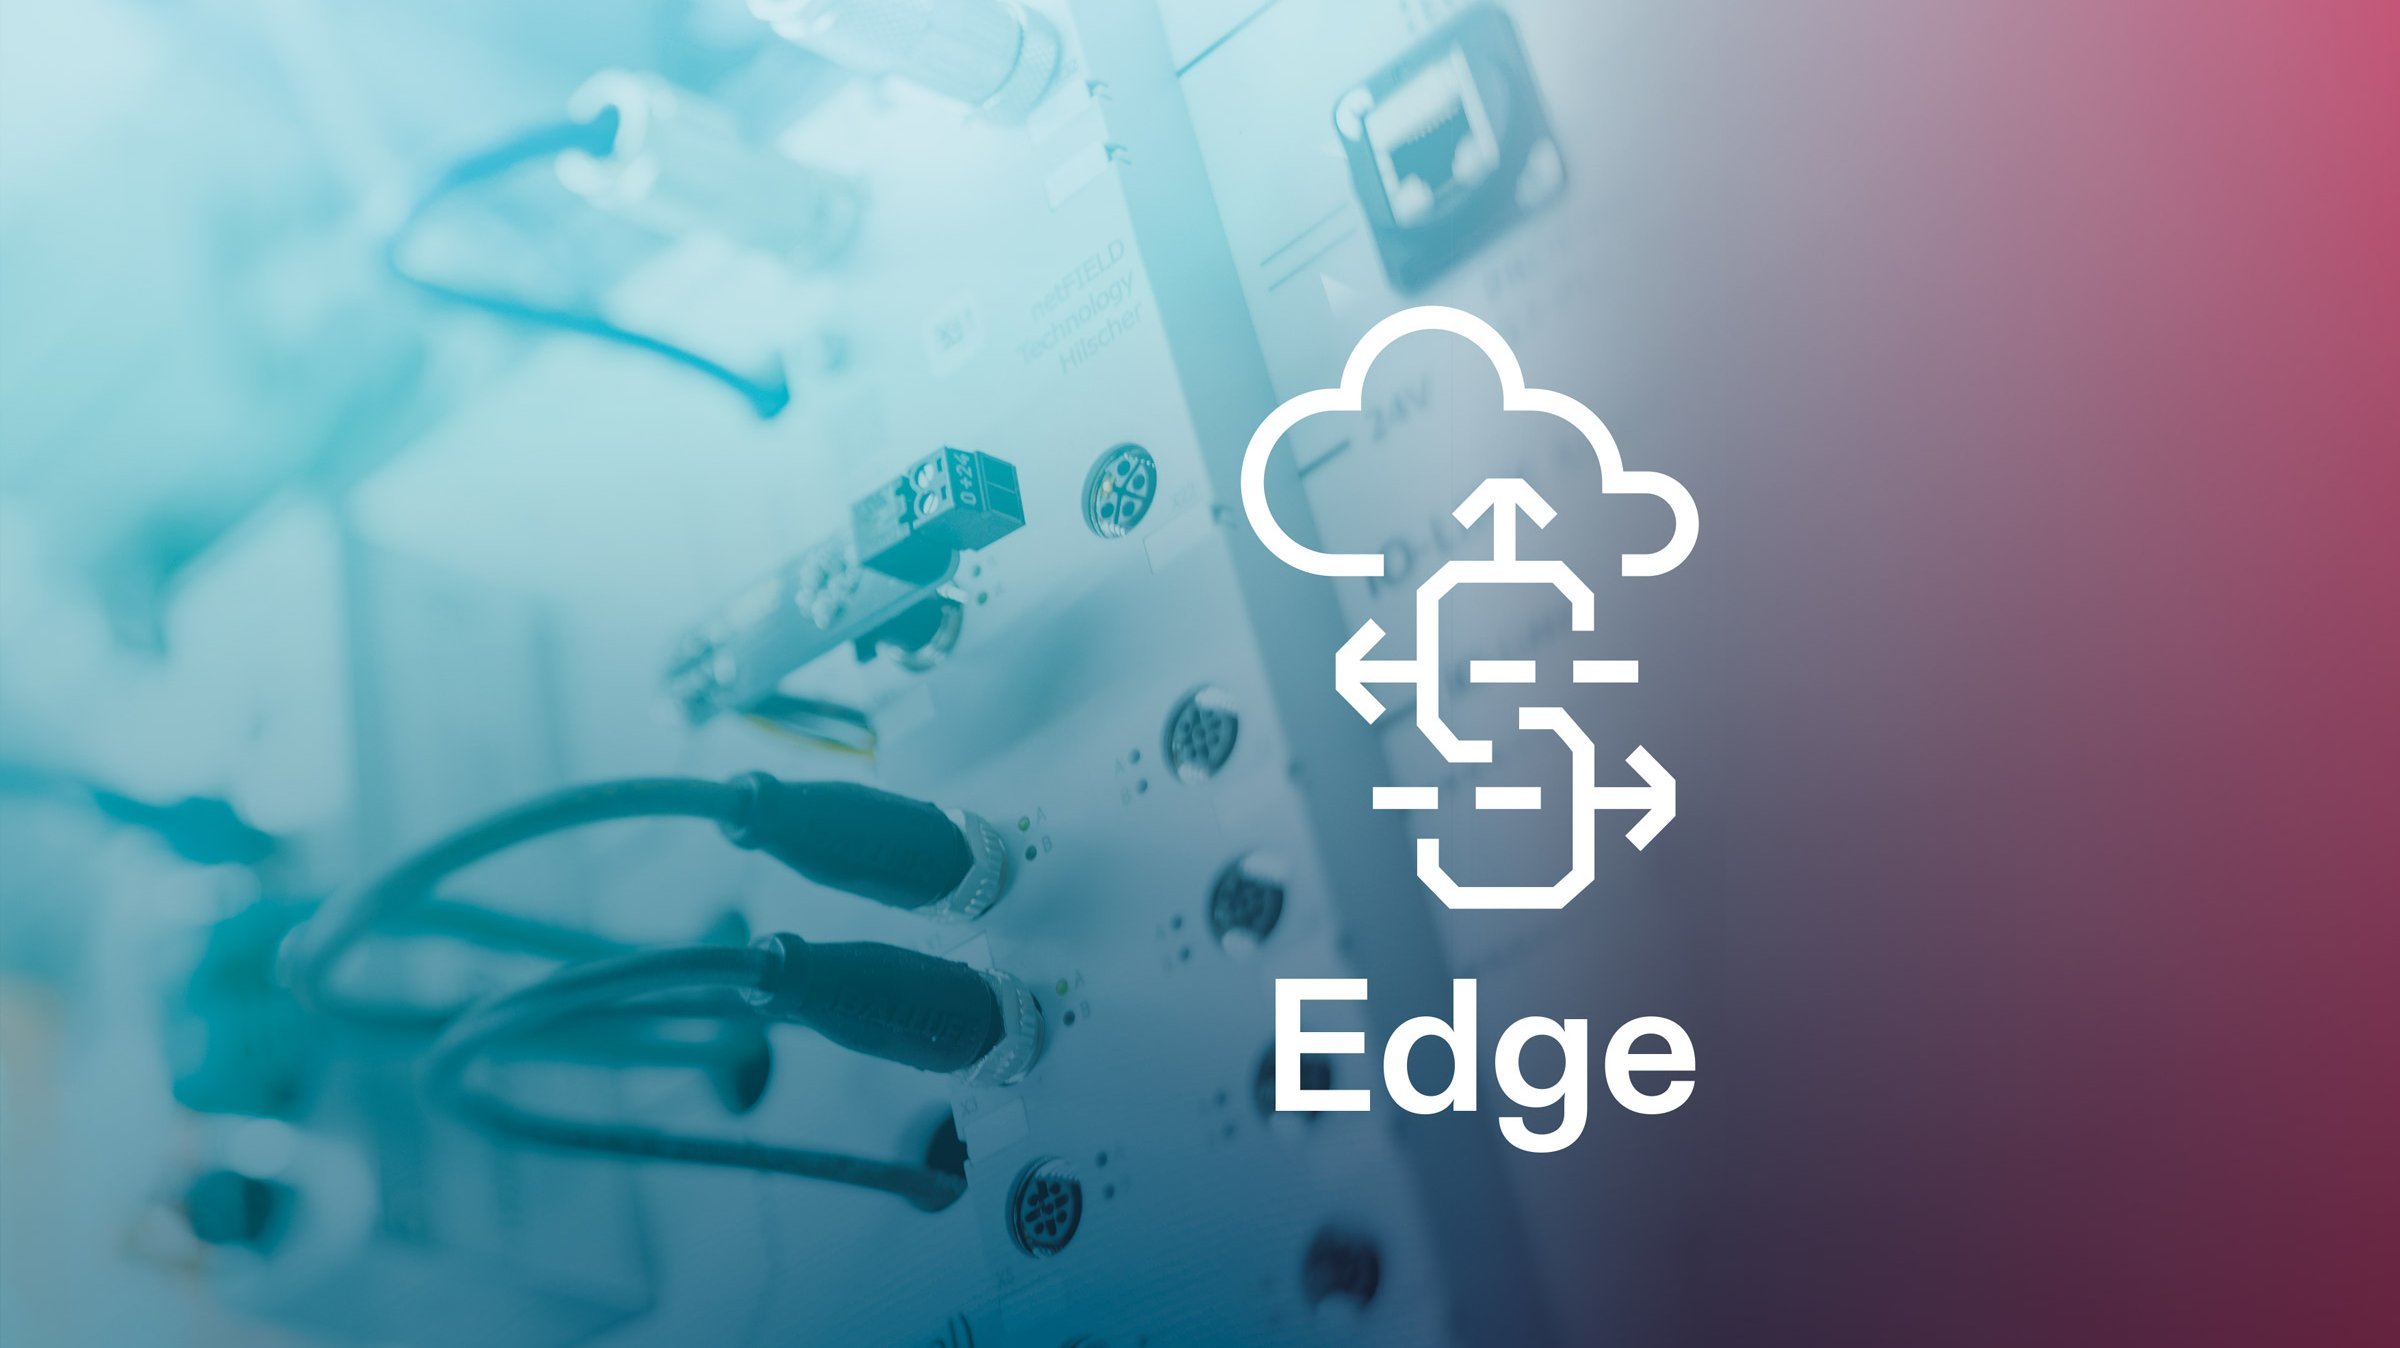 An icon which with three arrows pointing to the left, top and right. On top of the icon, a cloud symbol can be seen. In the background a sensorEDGE gateway from Hilscher with a colorful and slightly transparent blue and red overlay.